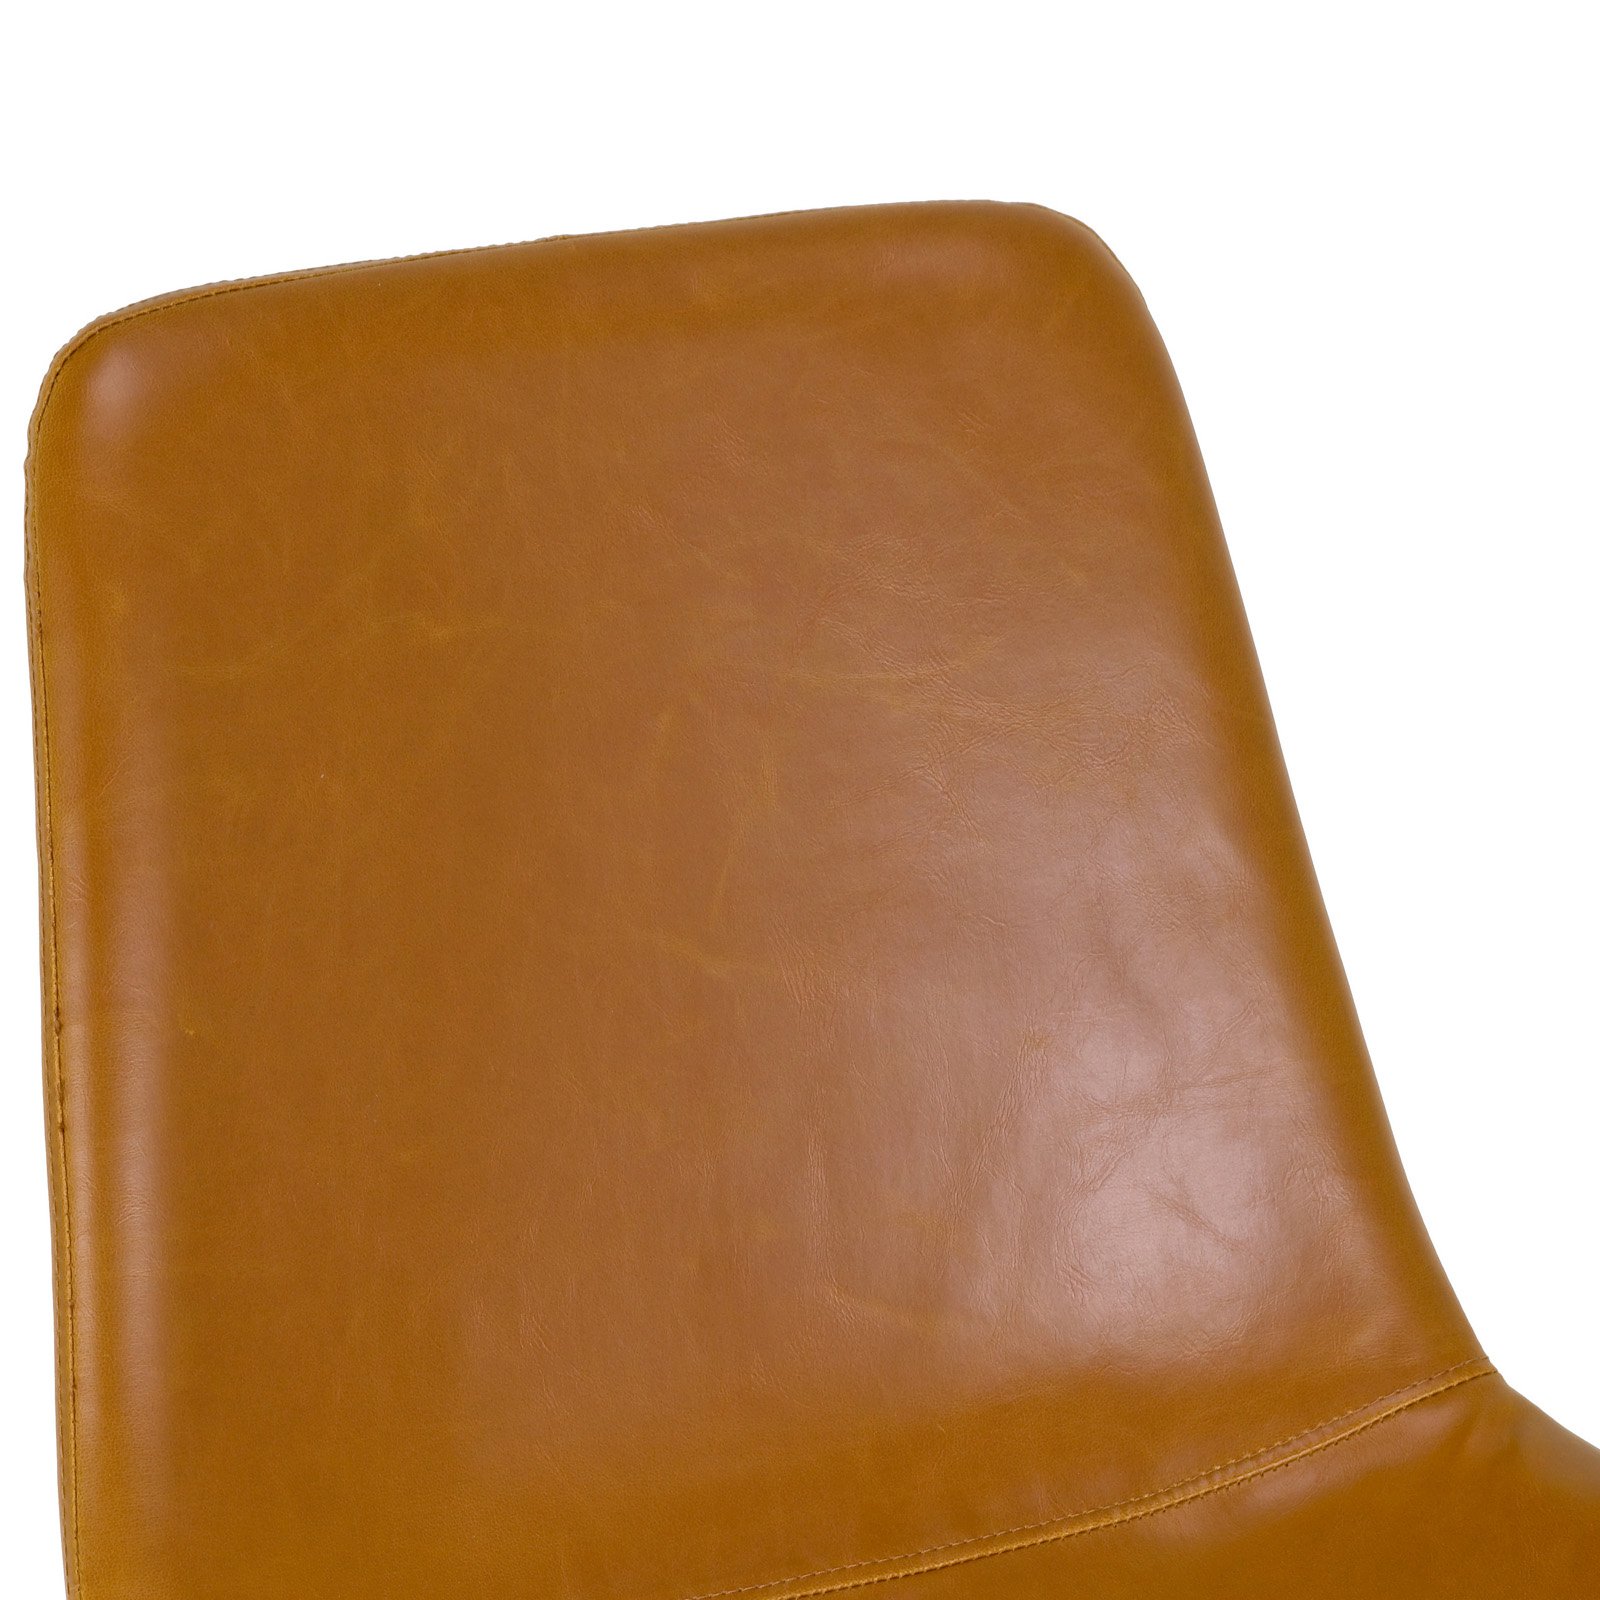 Set of 2 Alary Caramel Brown Faux Leather Modern Dining Chair with Black Iron Legs - image 4 of 6